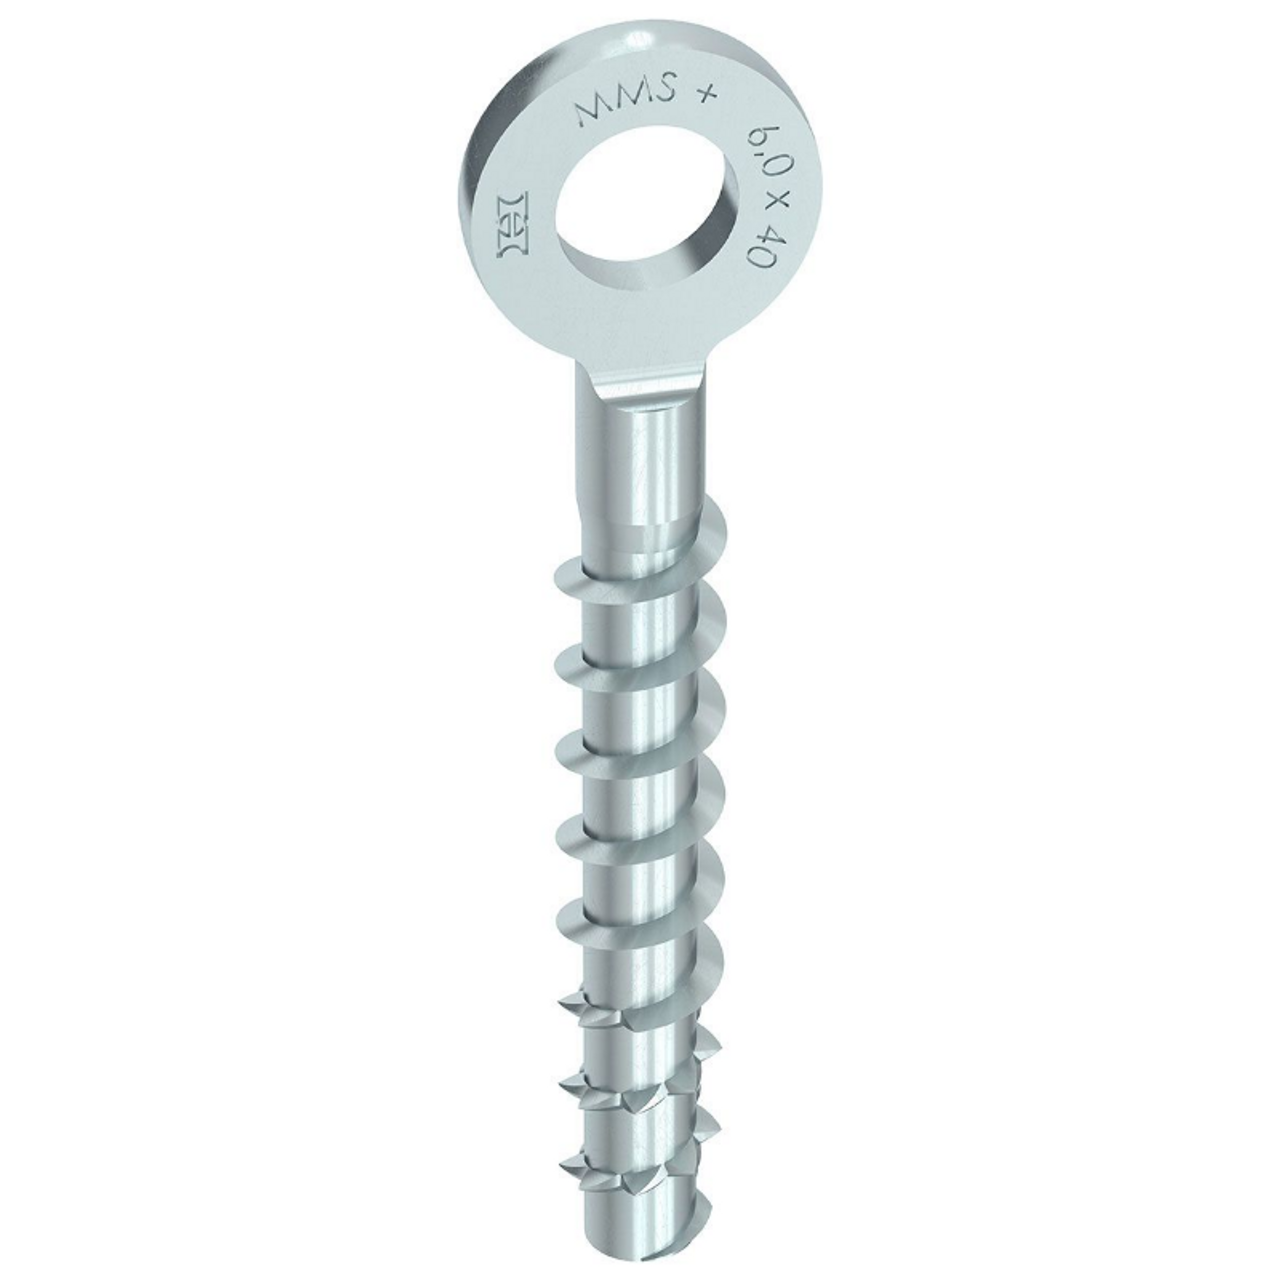 Craftsman Hardware, has a tools store where you can find Eye Bolt Screw Anchor such as HECO 6mm Silver Zinc Eye Bolt Screw Anchor for the Construction Industry in Australia and New Zealand